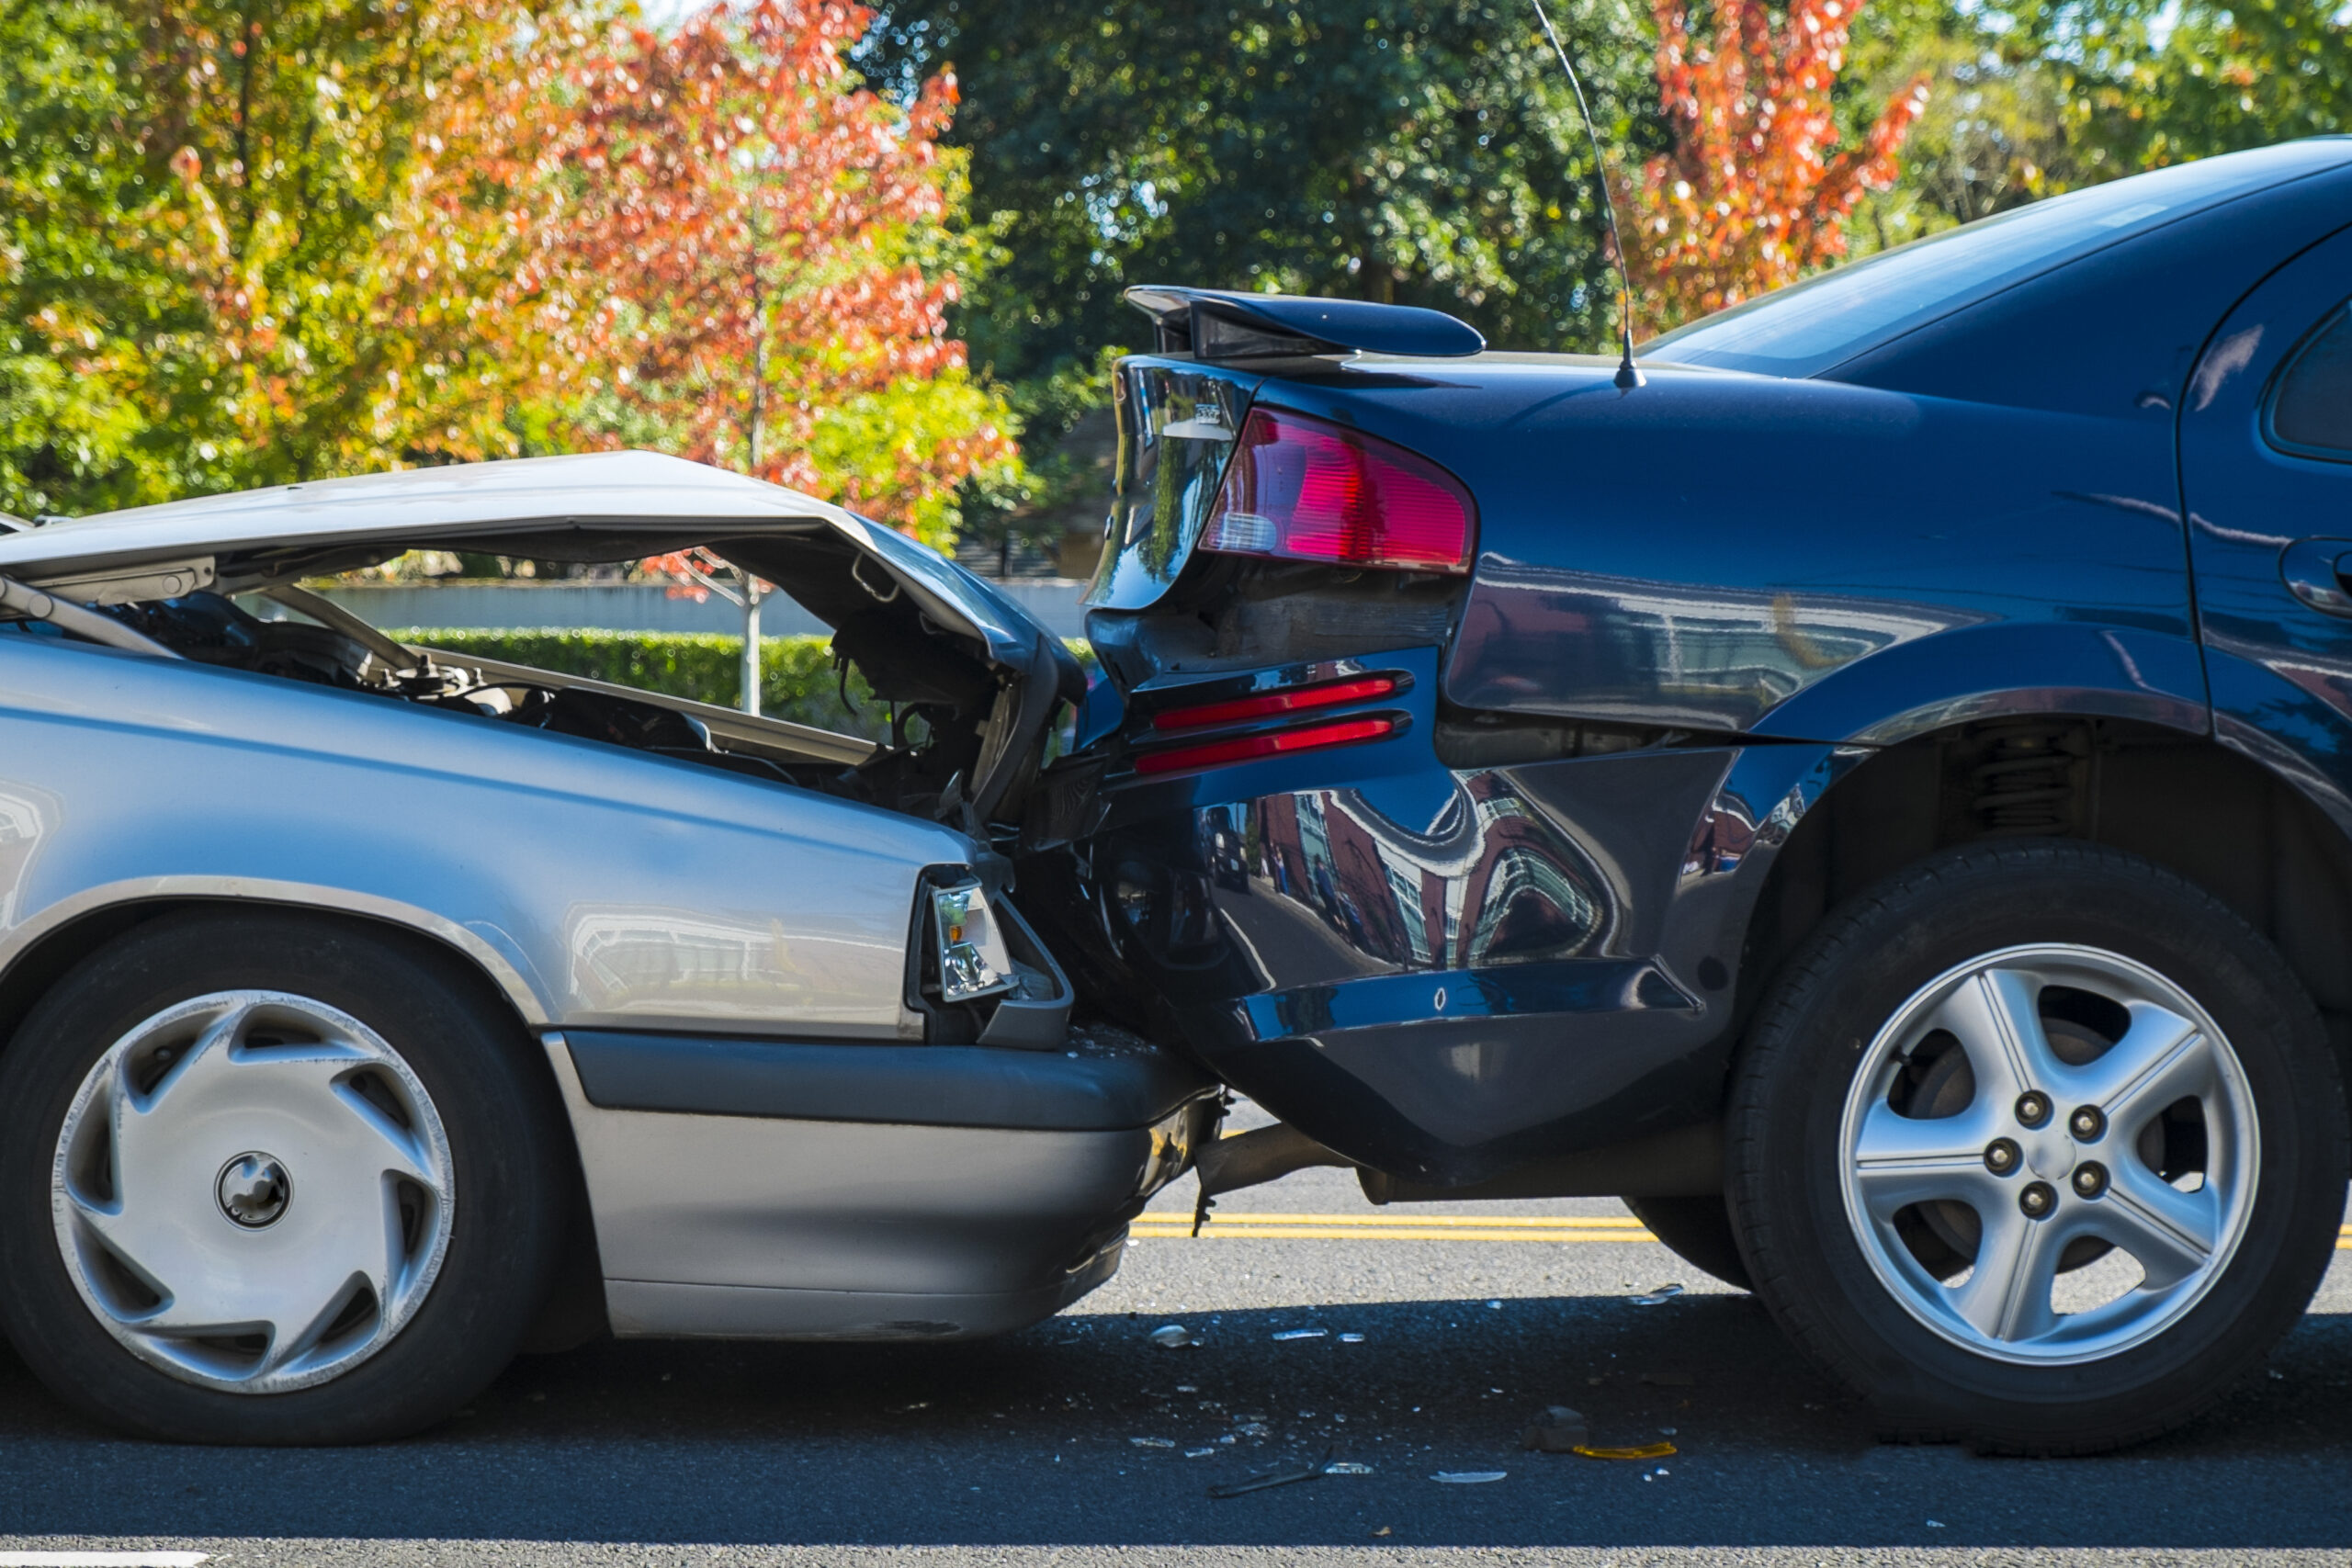  Motor vehicle accident in San Diego